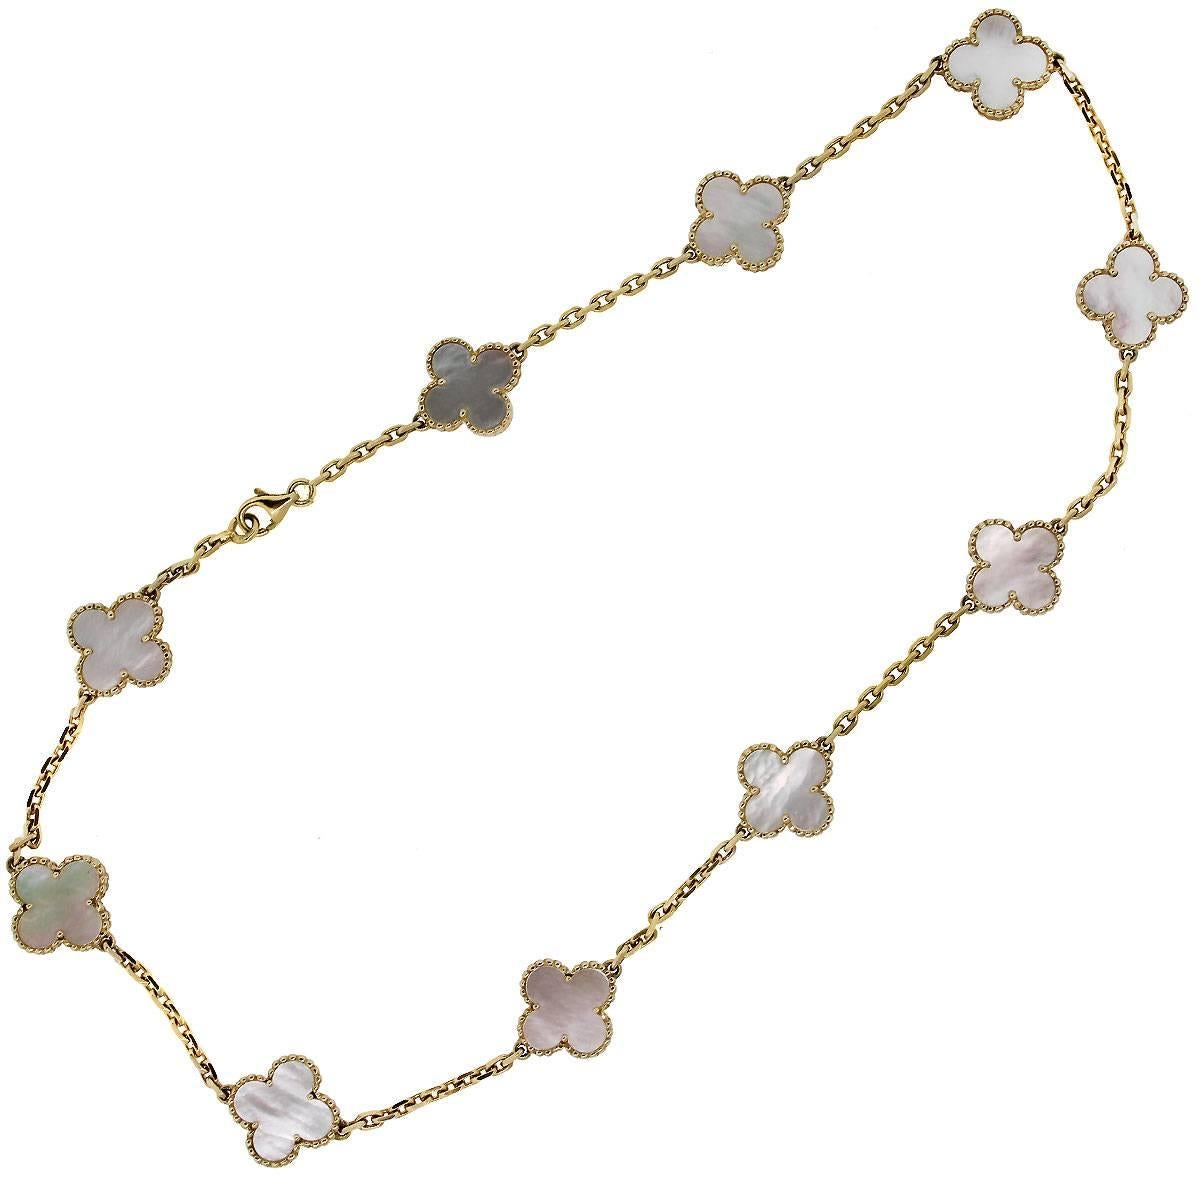 Designer	Van Cleef & Arpels 
Material	18k Yellow Gold
Gemstone Details	Mother of Pearl
Total Weight	23.4g (15dwt)
Necklace Length	16''
Clasp	Spring Ring
Additional Details	This item comes with a Raymond Lee Jewelers Presentation Box!
SKU	G5447